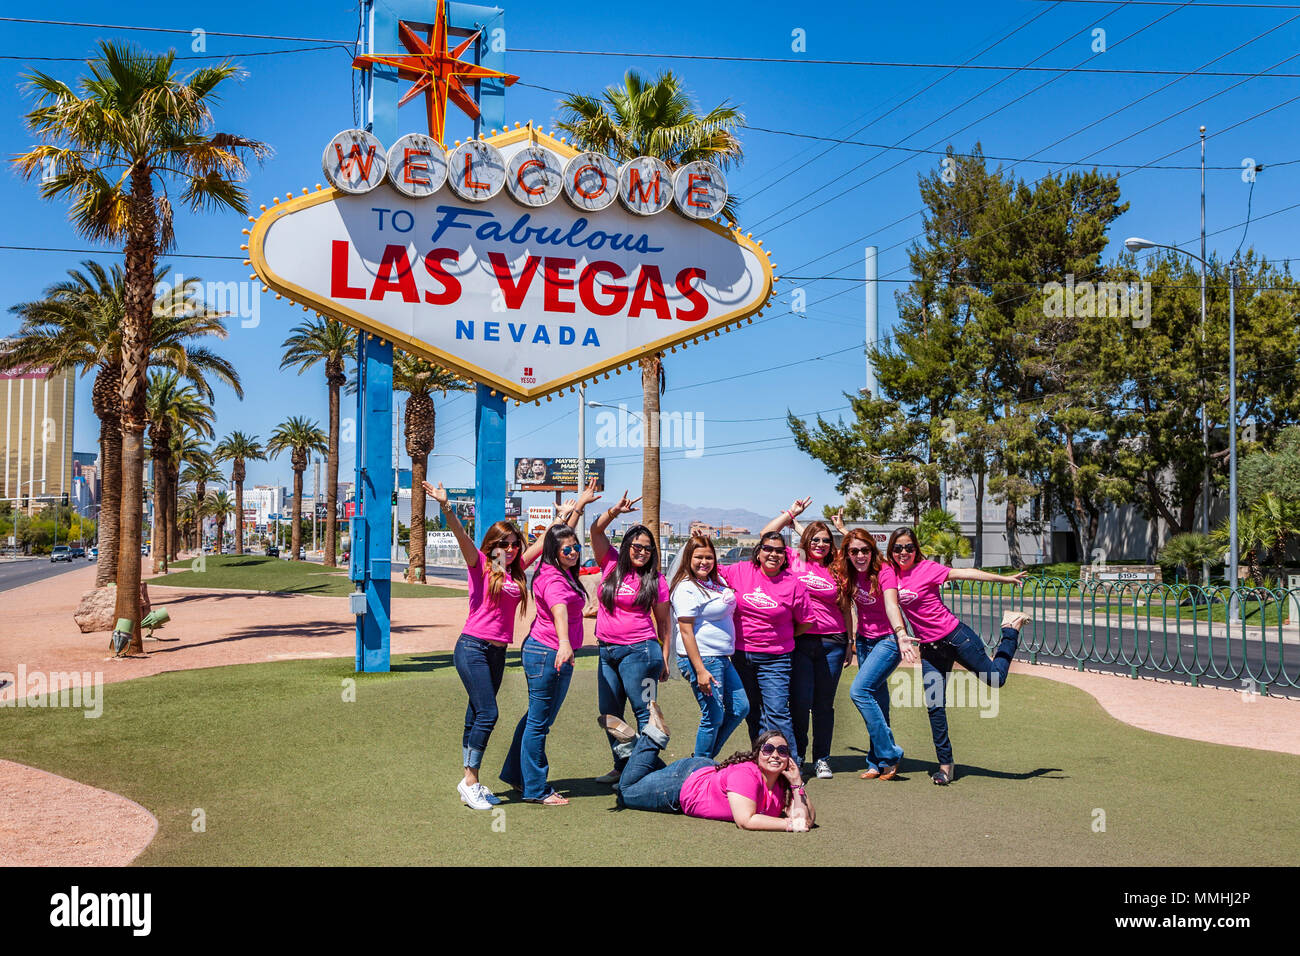 A bride-to-be and her bridesmaids pose under the landmark 'Welcome to Fabulous Downtown Las Vegas' sign in Las Vegas, Nevada Stock Photo